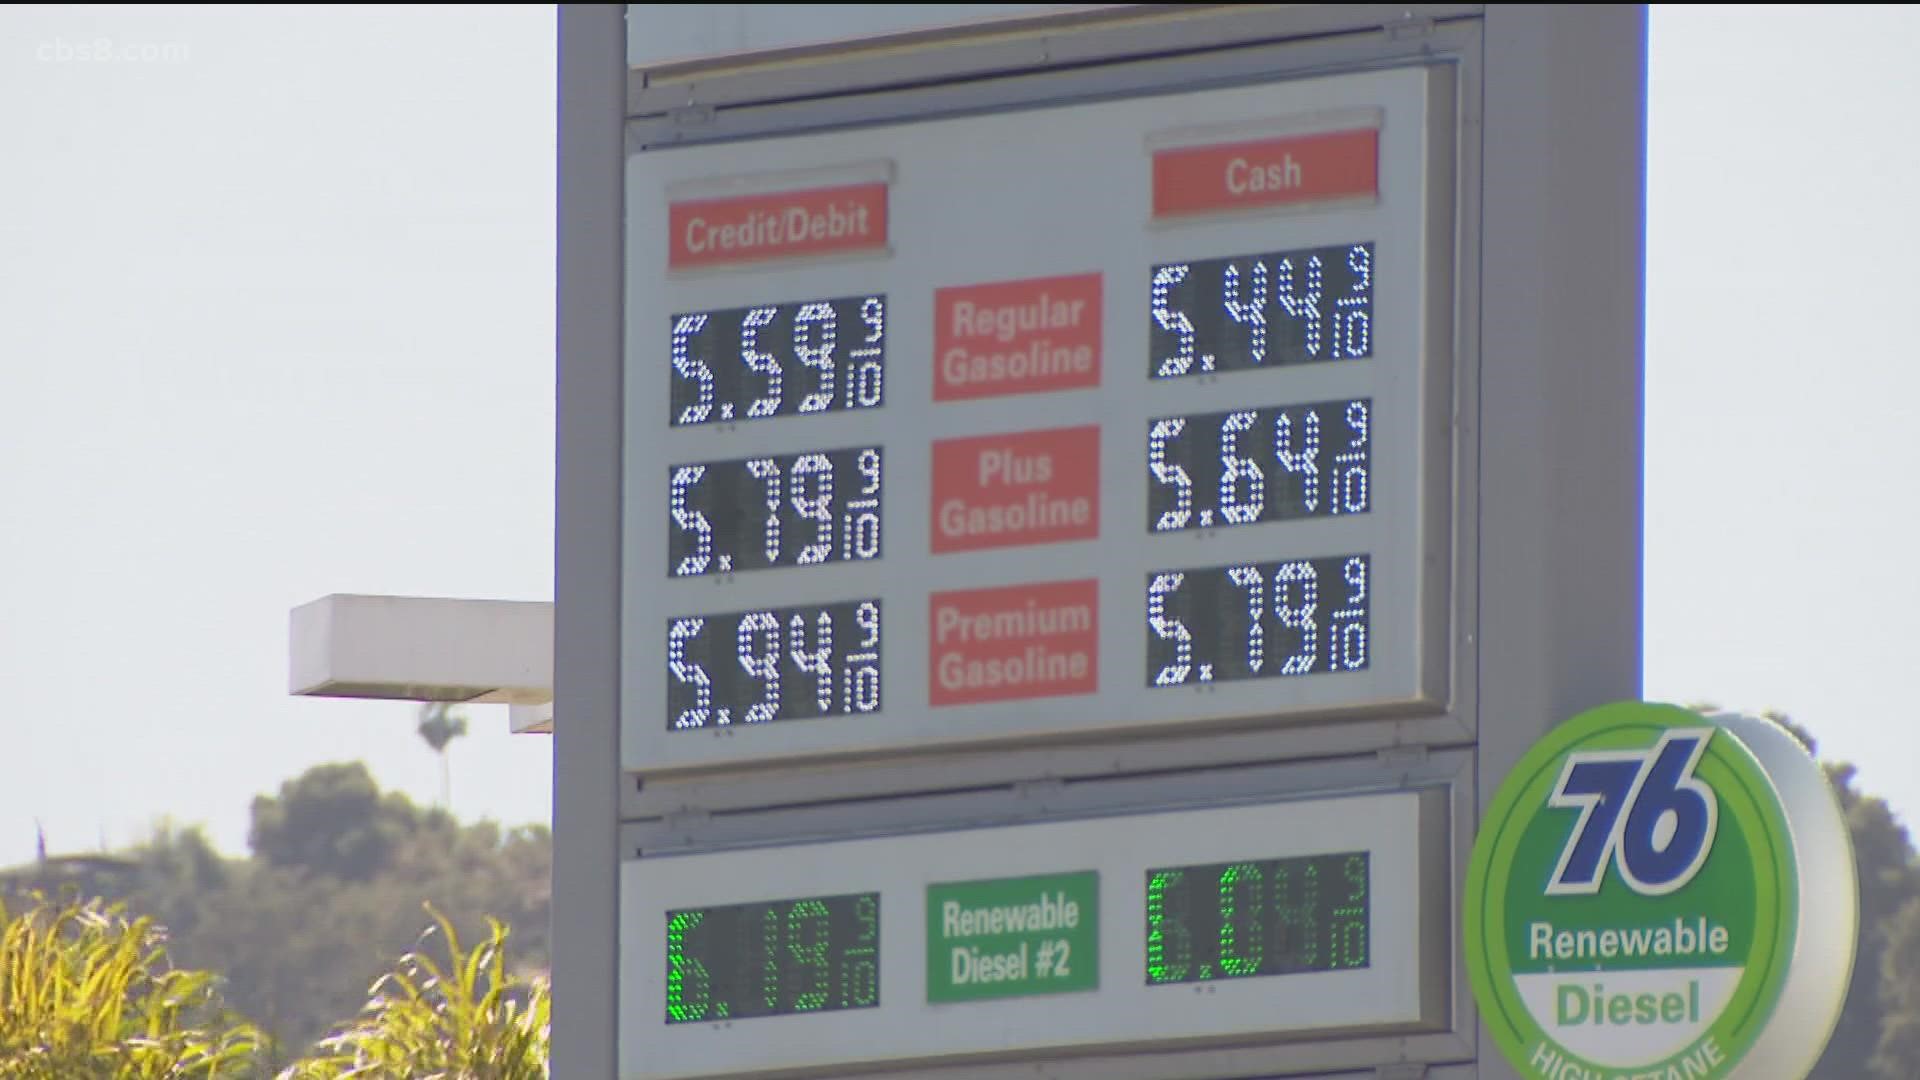 With gas prices inching up nearly every day, many San Diegans have been on the hunt for the cheapest gas or most convenient option in the county.